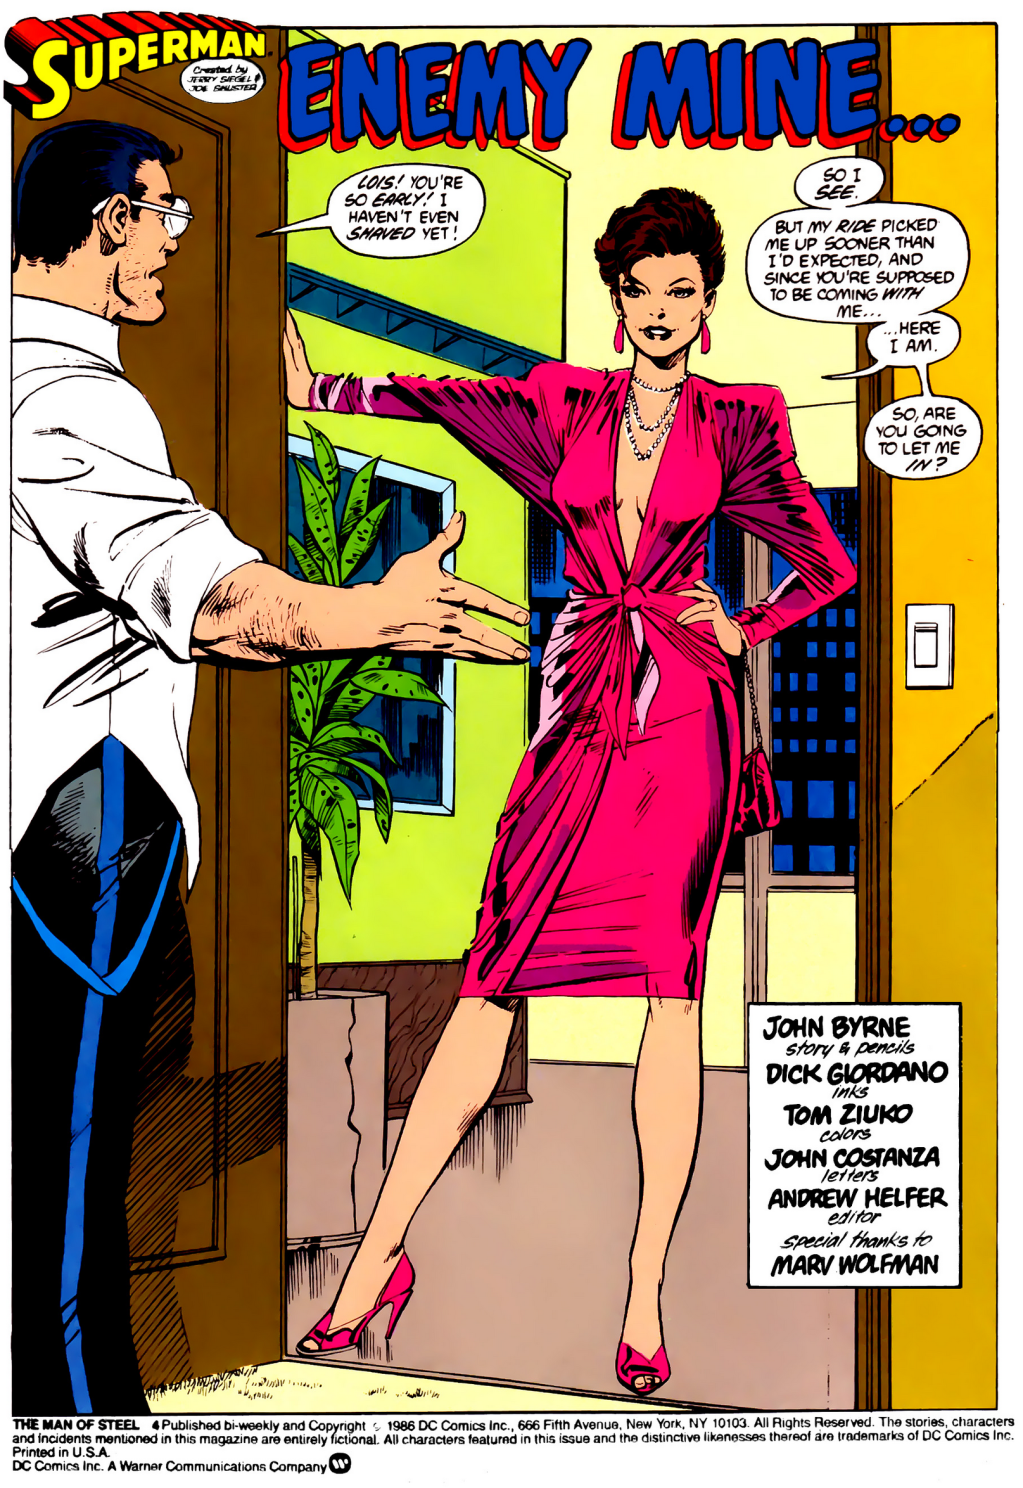 Lois Lane makes a surprise appearance at Clark's doorstep in The Man of Steel Vol. 1 #4 "Enemy Mine..." (1986), DC. Words by John Byrne, art by John Byrne, Dick Giordano, Tom Ziuko, and John Costanza.